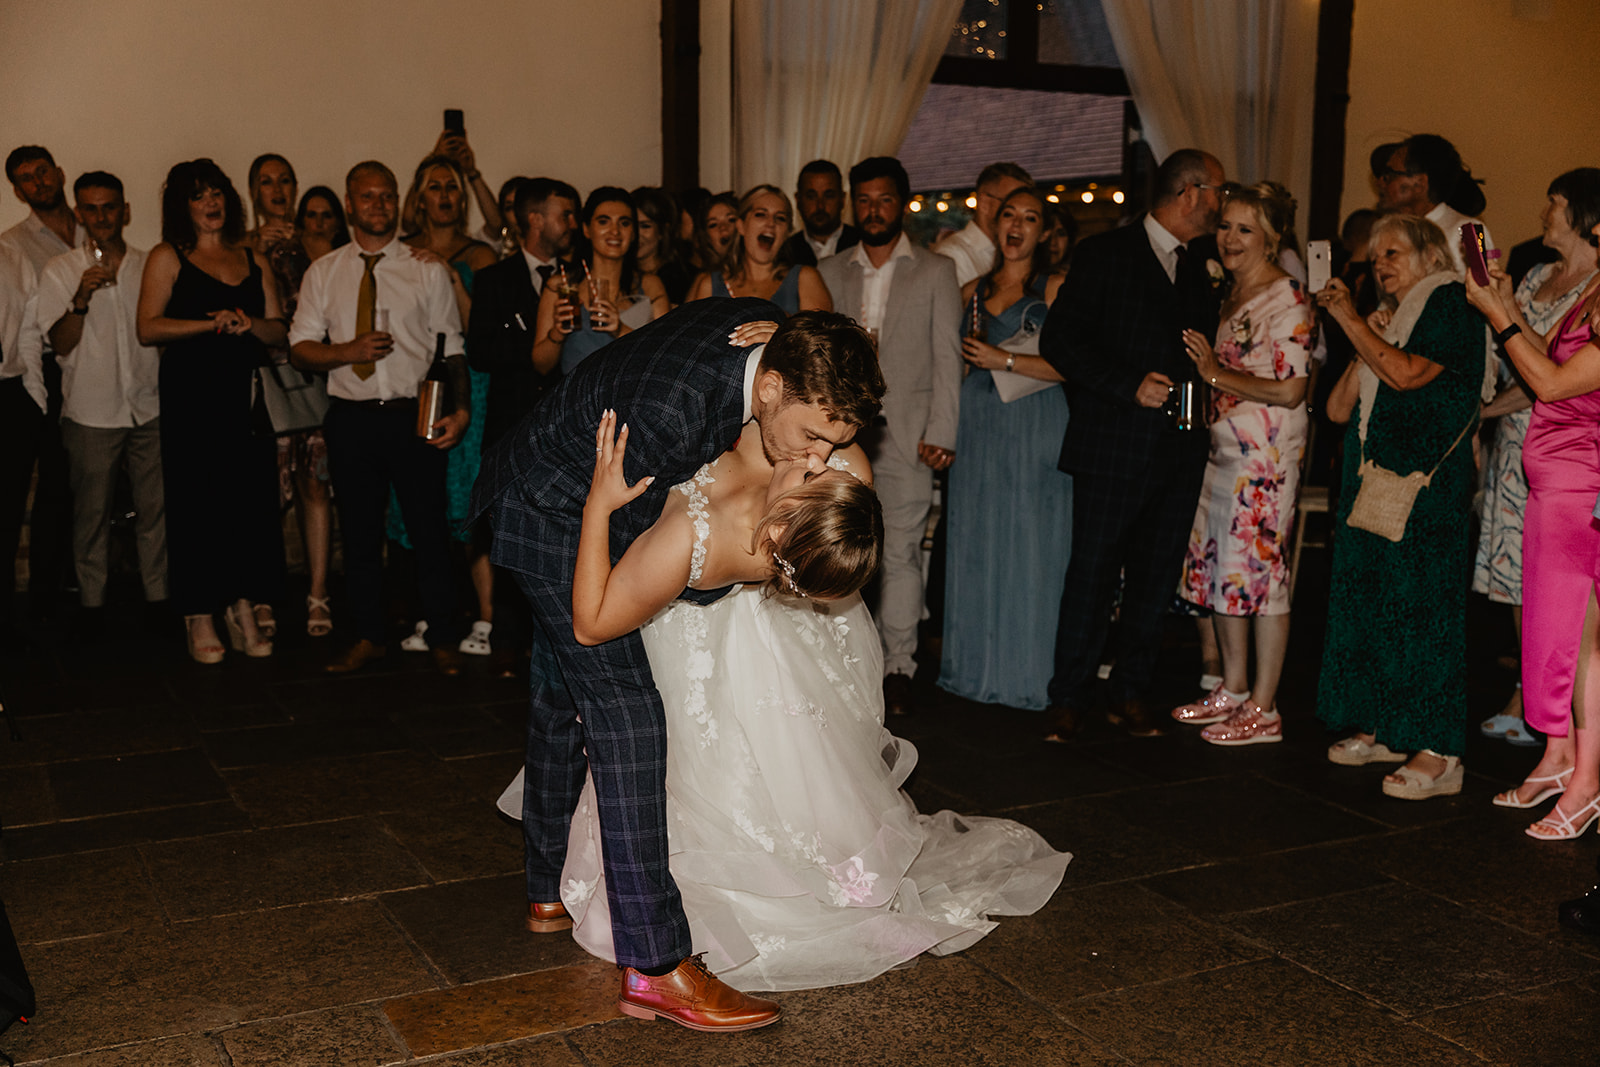 Bride and groom share a first dance at a wedding at Long Furlong Barn, Sussex. By OliveJoy Photography